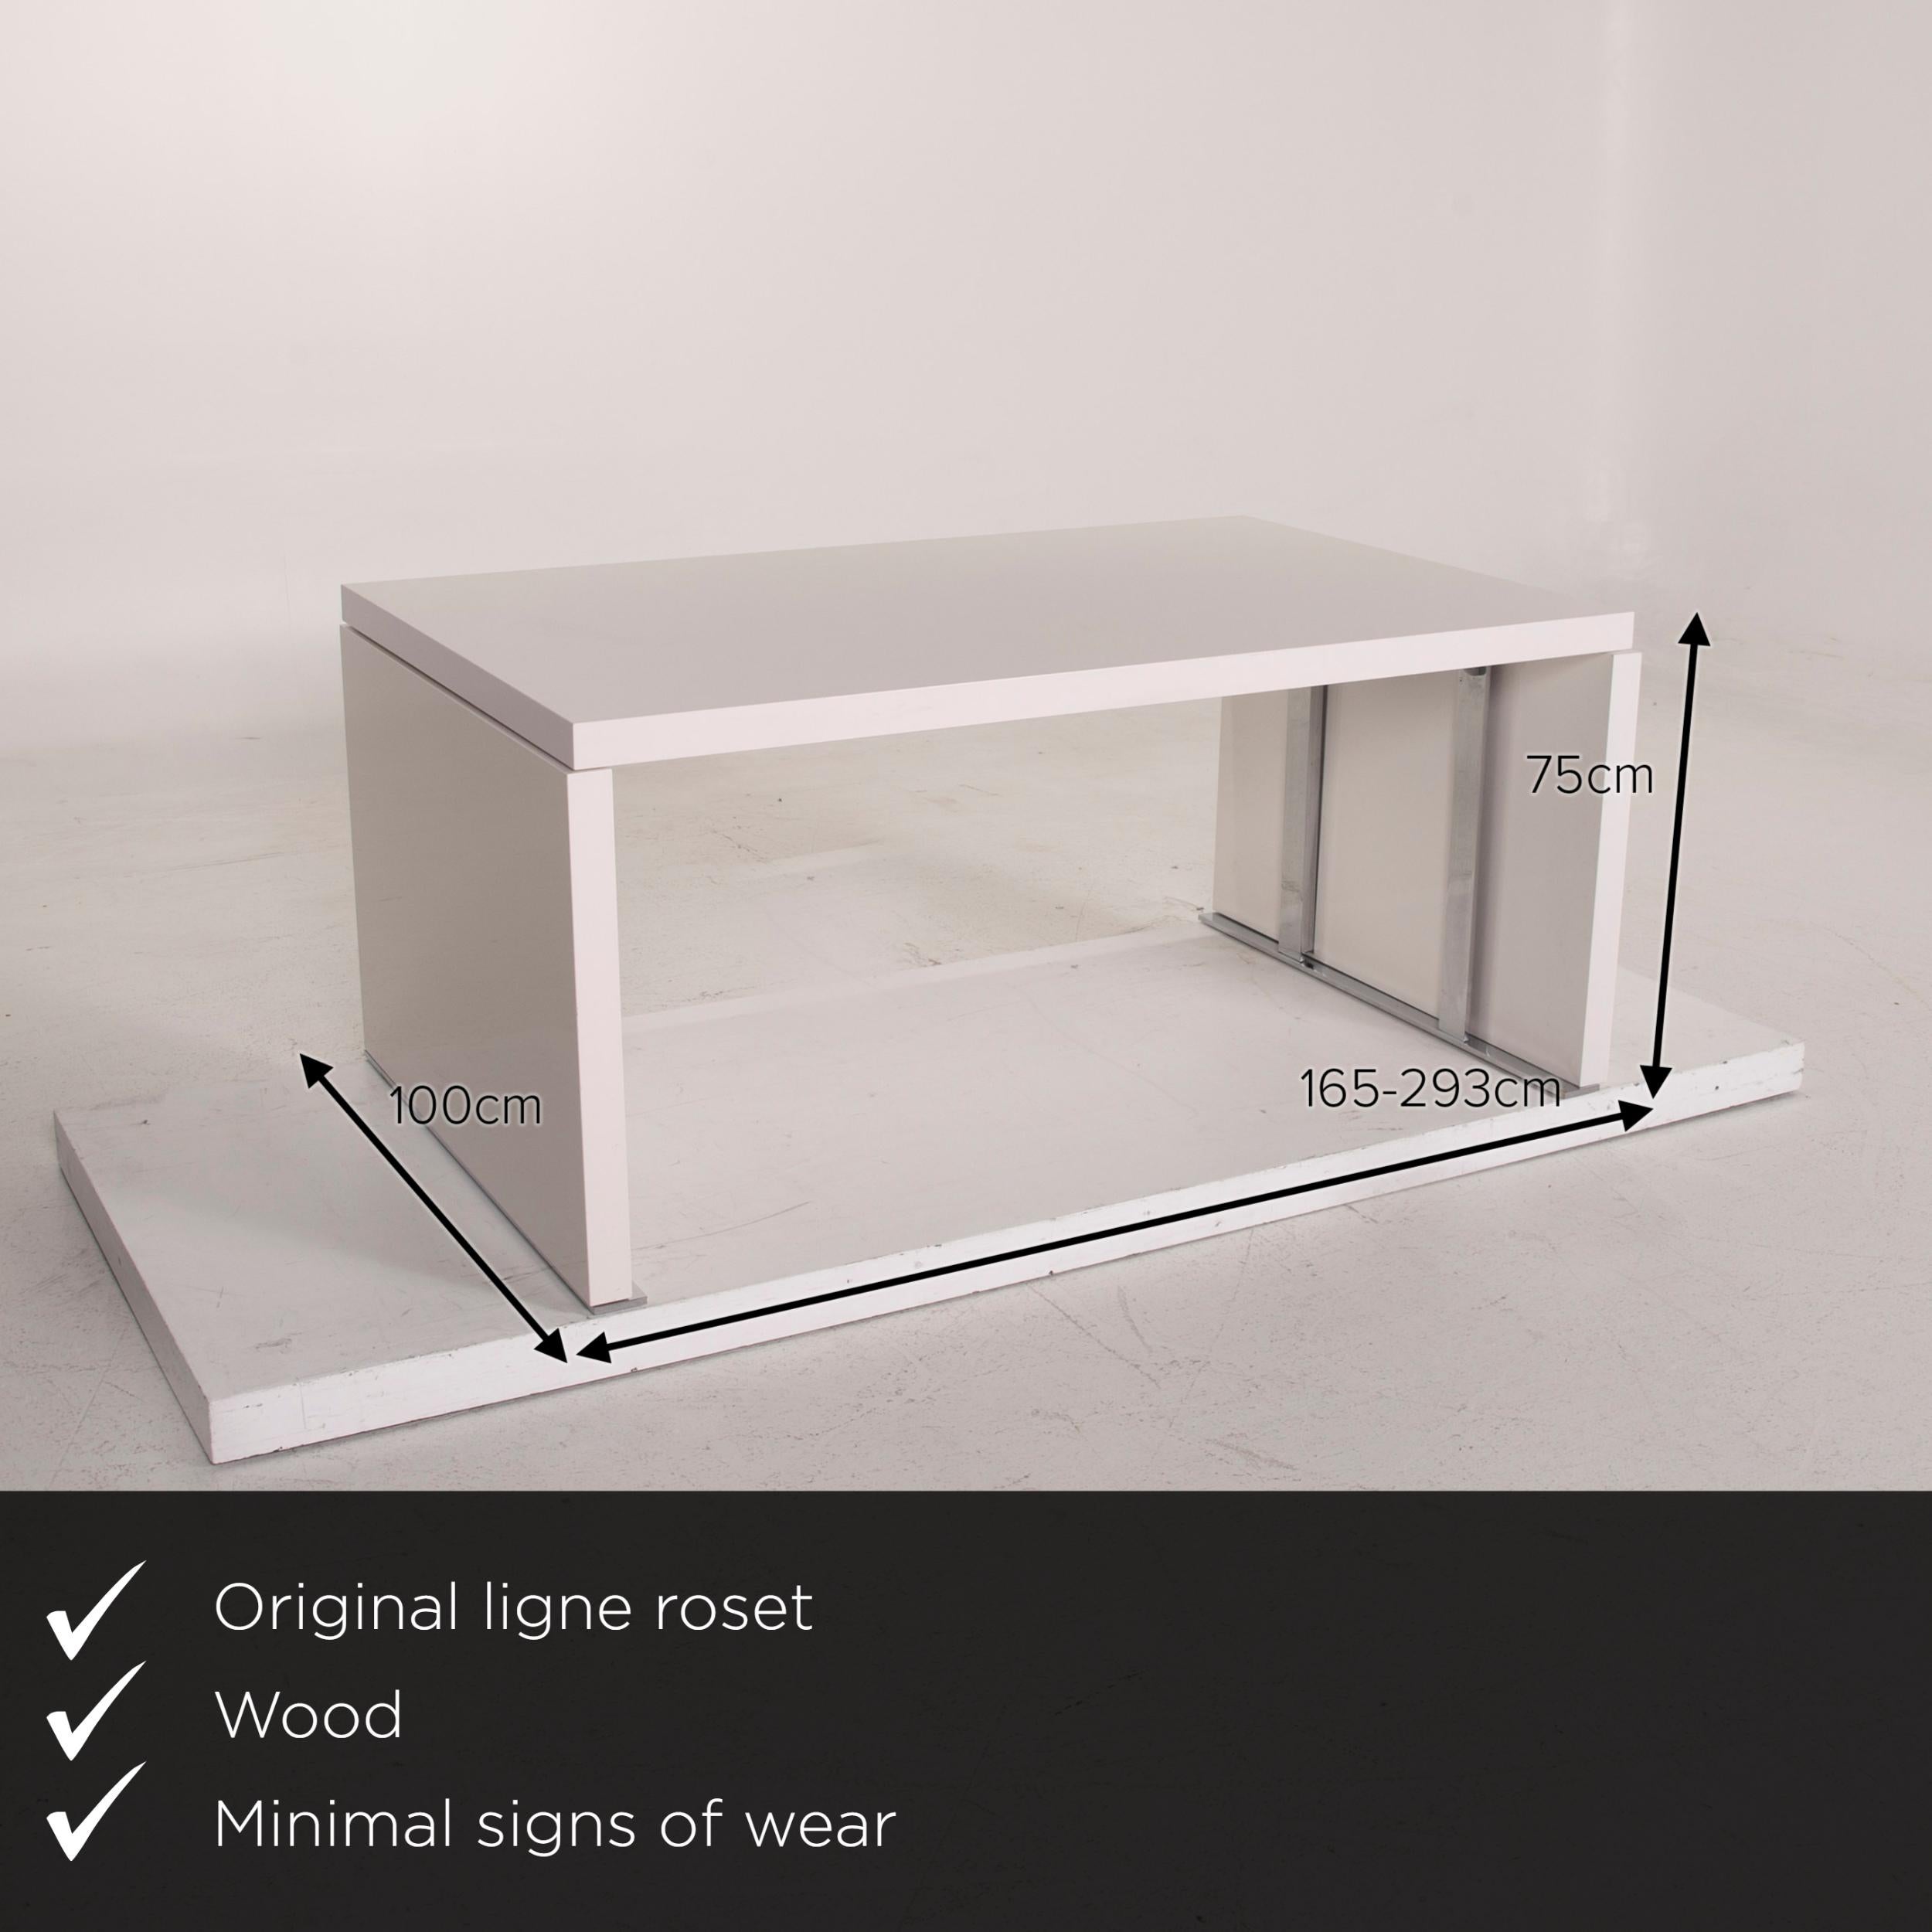 We present to you a Ligne Roset wood table white dining table function expandable.

Product measurements in centimeters:

Depth 100
Width 165
Height 75.







    